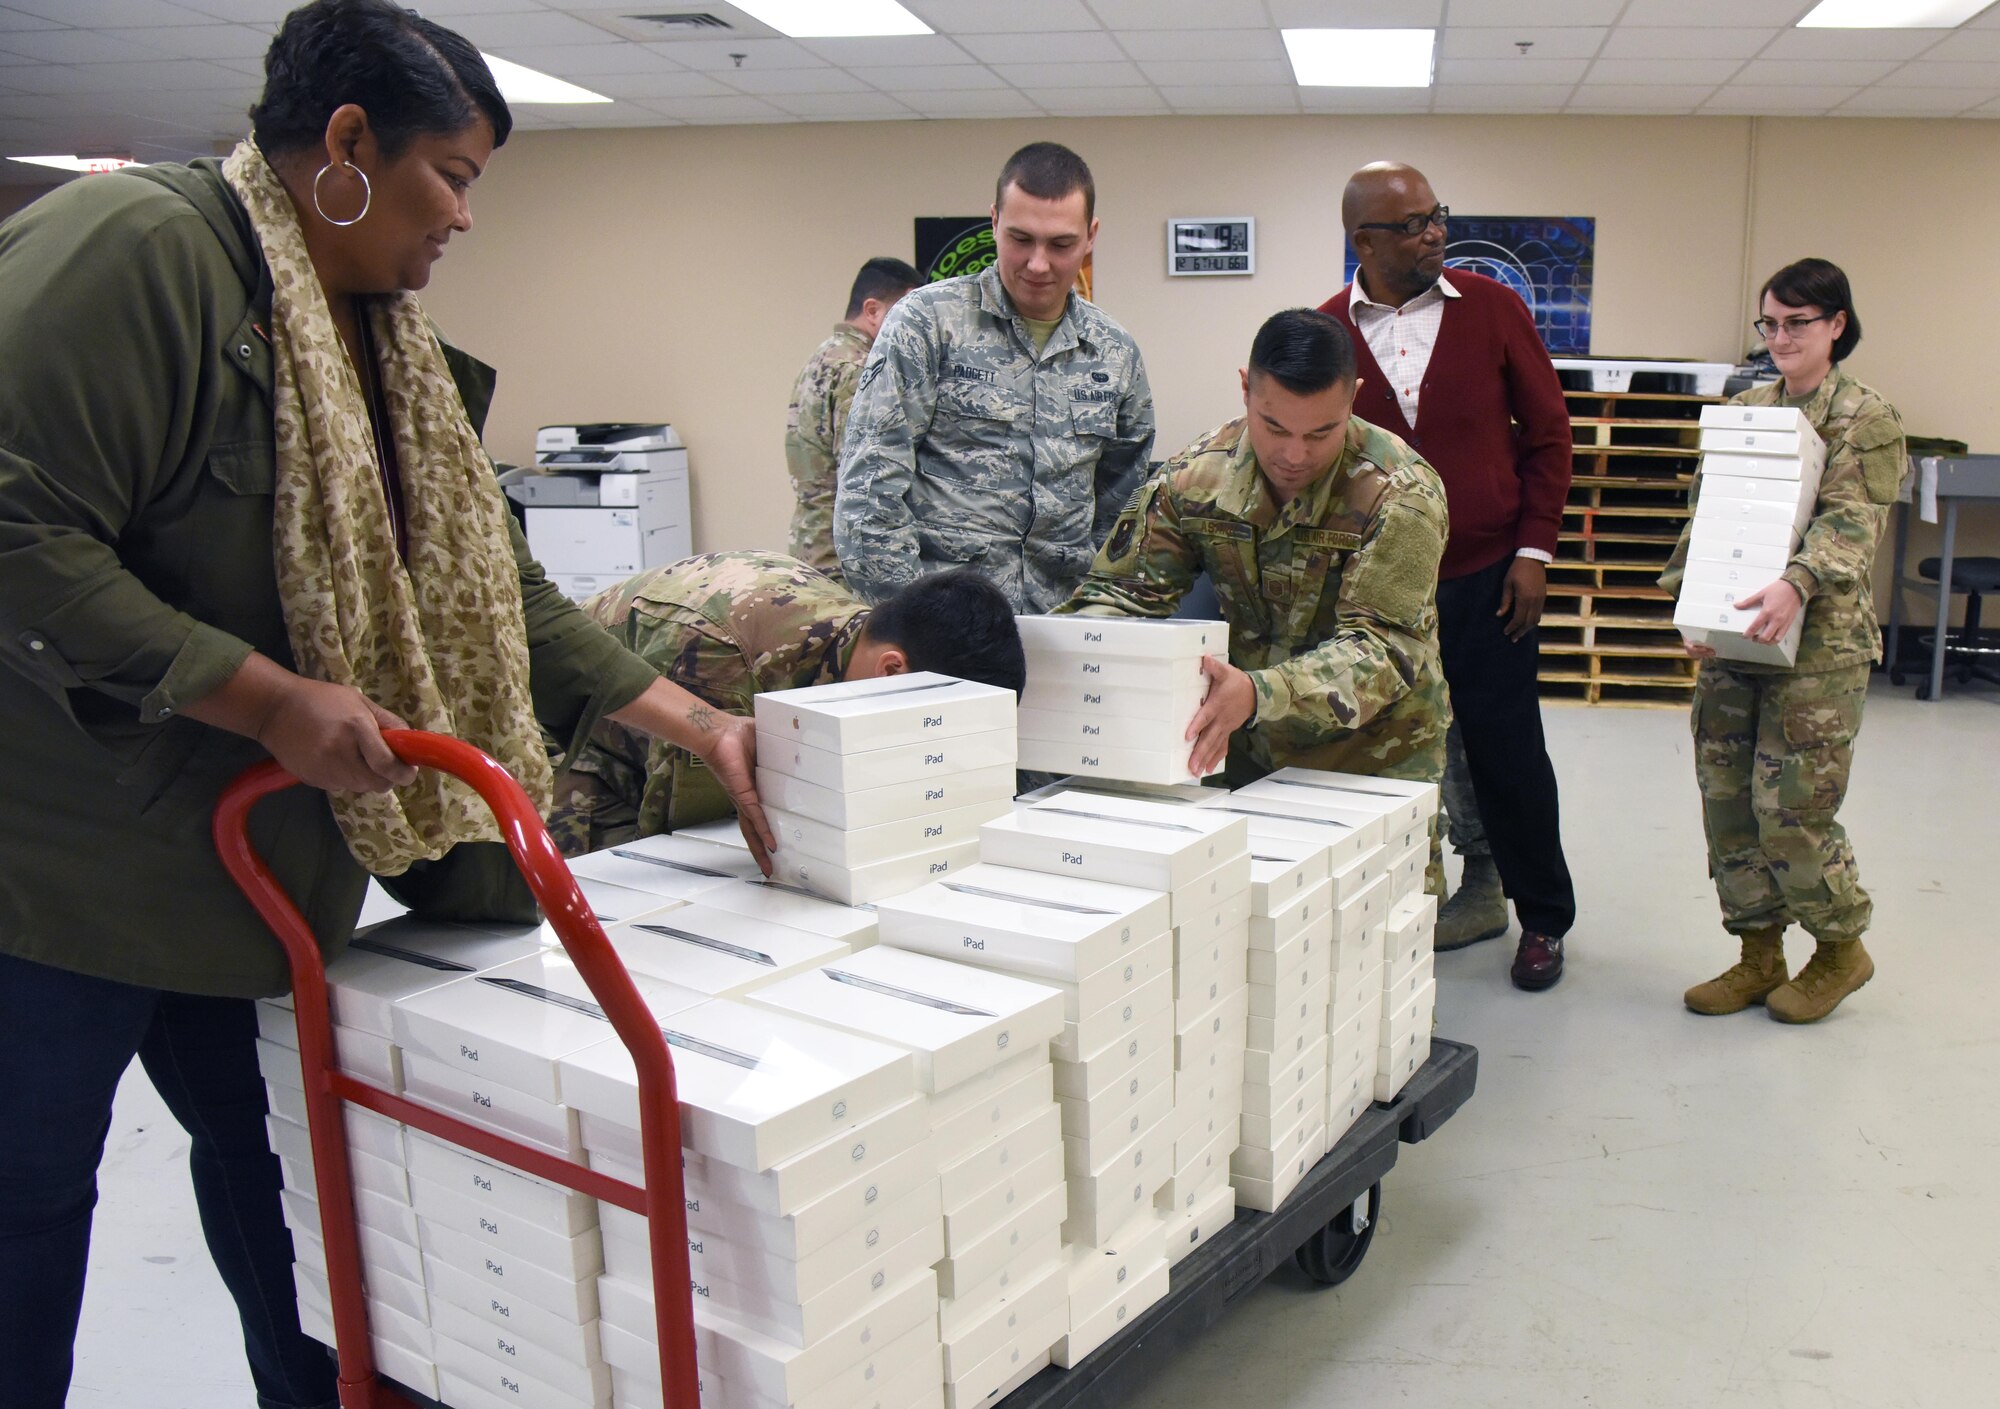 Members of the 81st Communications Squadron load 200 iPads at Keesler Air Force Base, Miss., Dec. 6, 2018. The 81st CS joined efforts with its honorary commander, Jade Ferguson, Mississippi Public Service Commission, Southern District district director, in identifying a school in need. Through this community partnership 200 iPads, valued at $72,000, were donated to the pre-kindergarten through second grade school for the opportunity of exploring science, technology, engineering, and mathematics (STEM). (U.S. Air Force photo by Kemberly Groue)